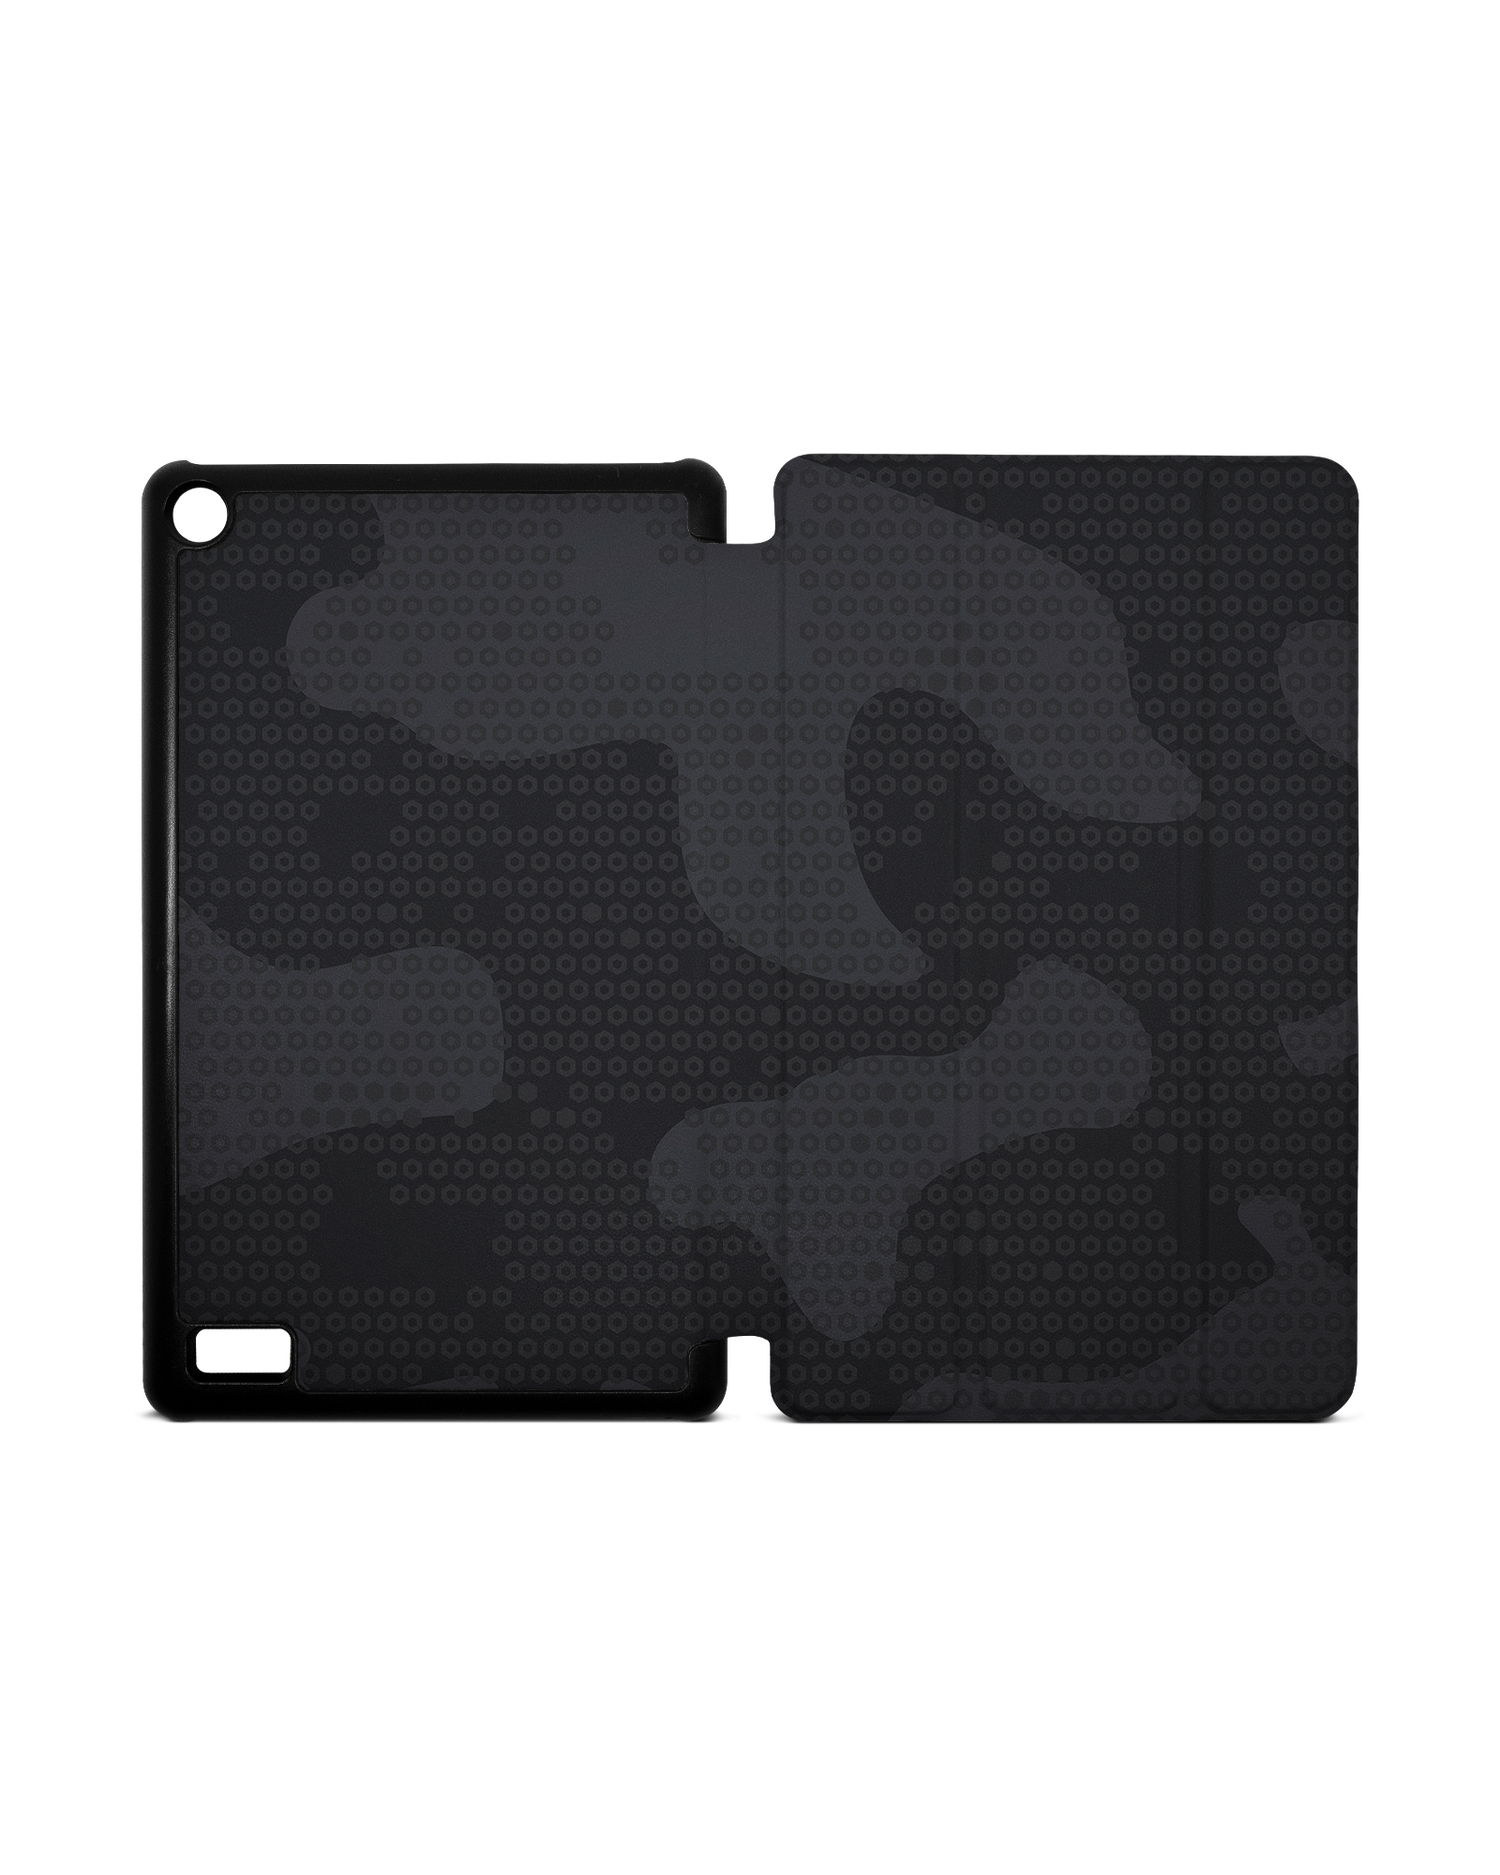 Spec Ops Dark Tablet Smart Case for Amazon Fire 7: Opened